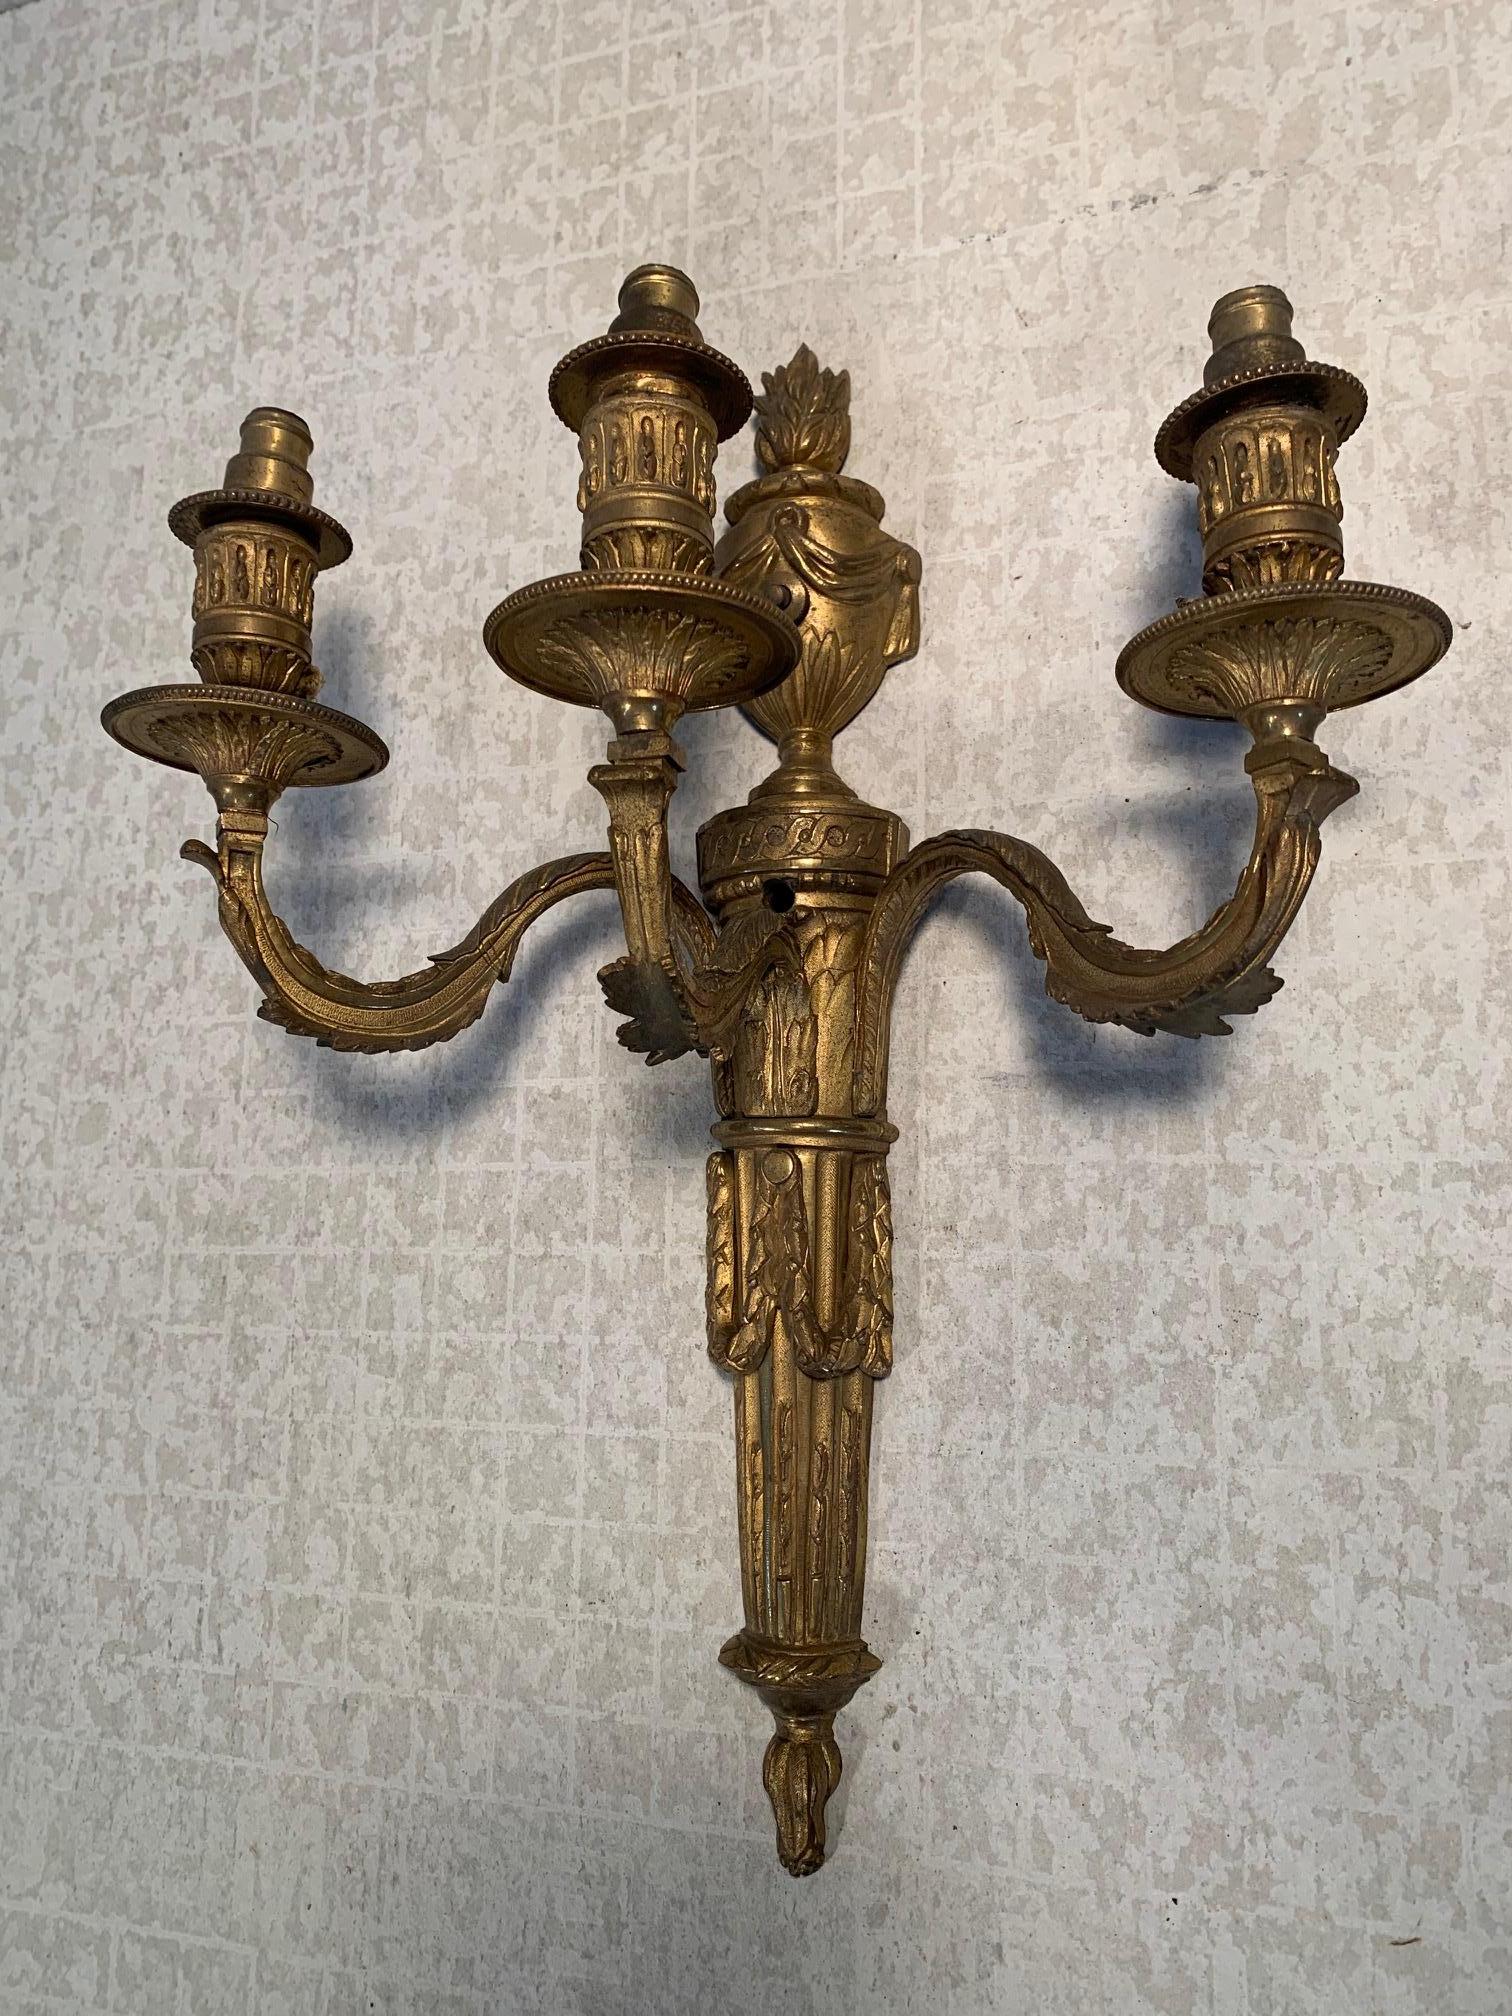 Pair of 3-arm, continental candle sconces with early electrification. Sconces feature foliate sleeved arm with beaded bobesche rim and a tapered fixture body. Since body is surmounted with swaged urn form topped with flame. Original surfaces with